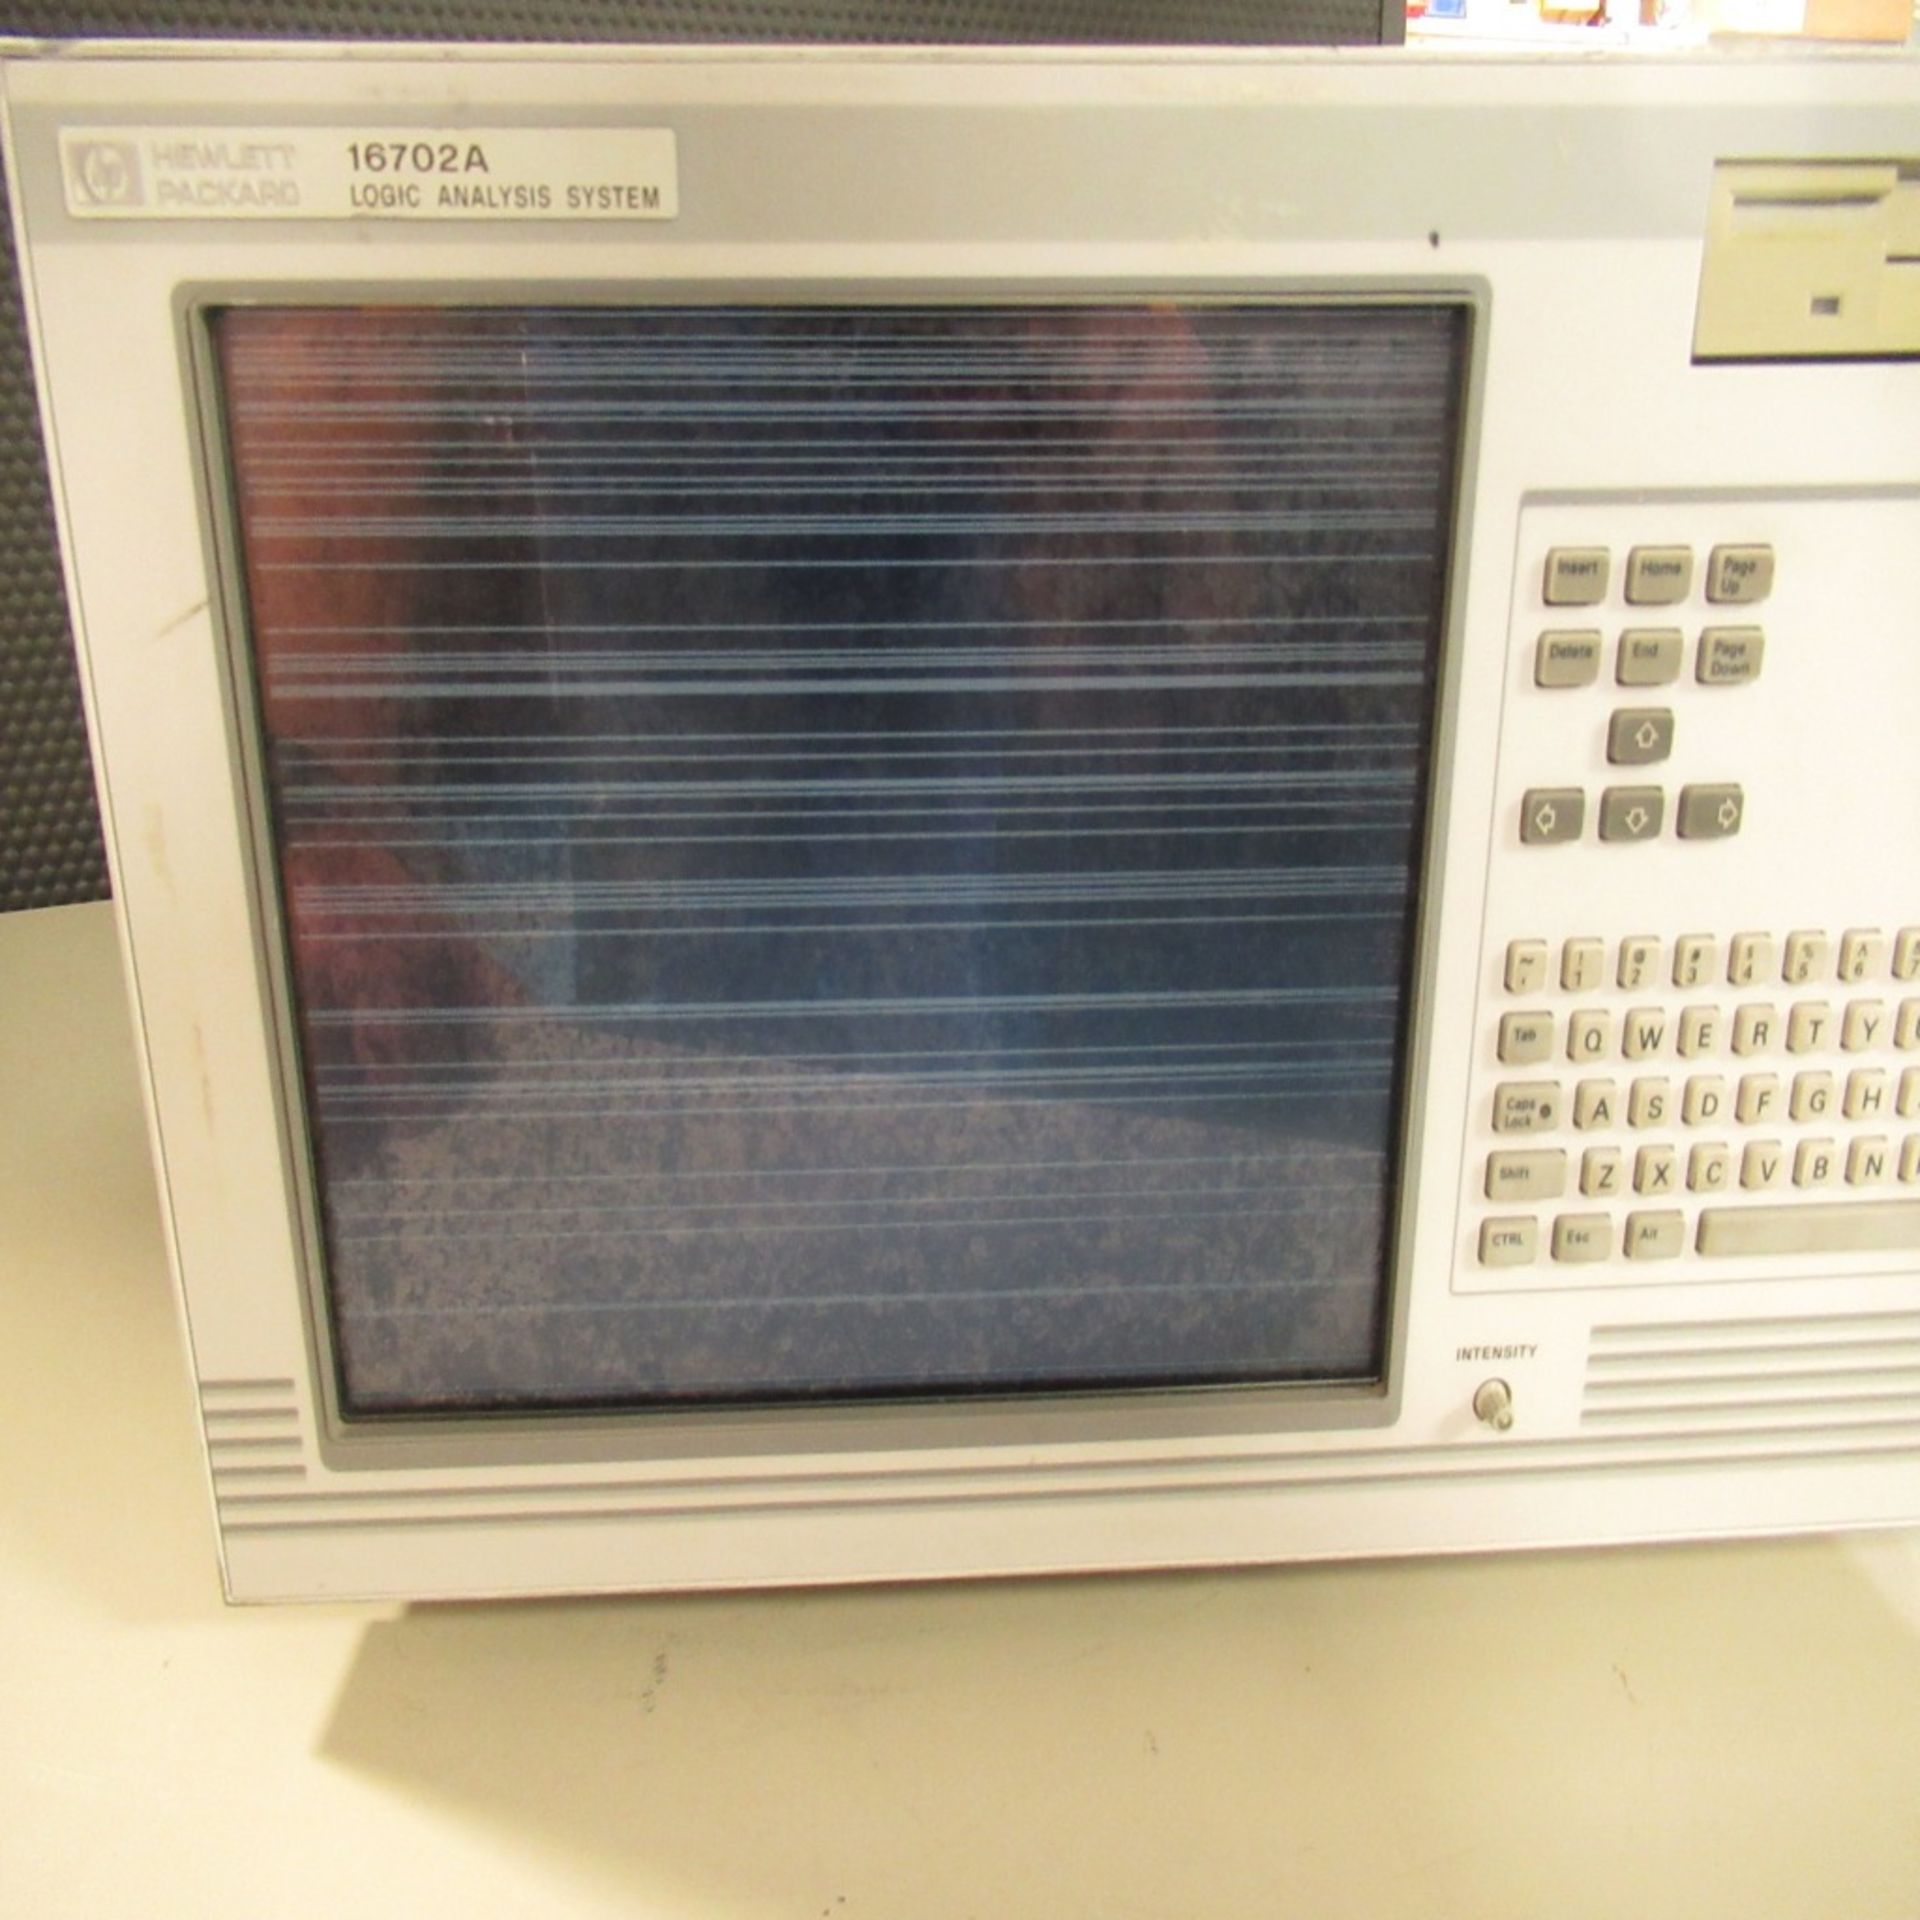 PHOTON SNAP SHOT MODEL 6000 *POWERS ON* NO SCREEN DISPLAY; FARNELL AP20-80 REGULATED POWER SUPPLY * - Image 28 of 222